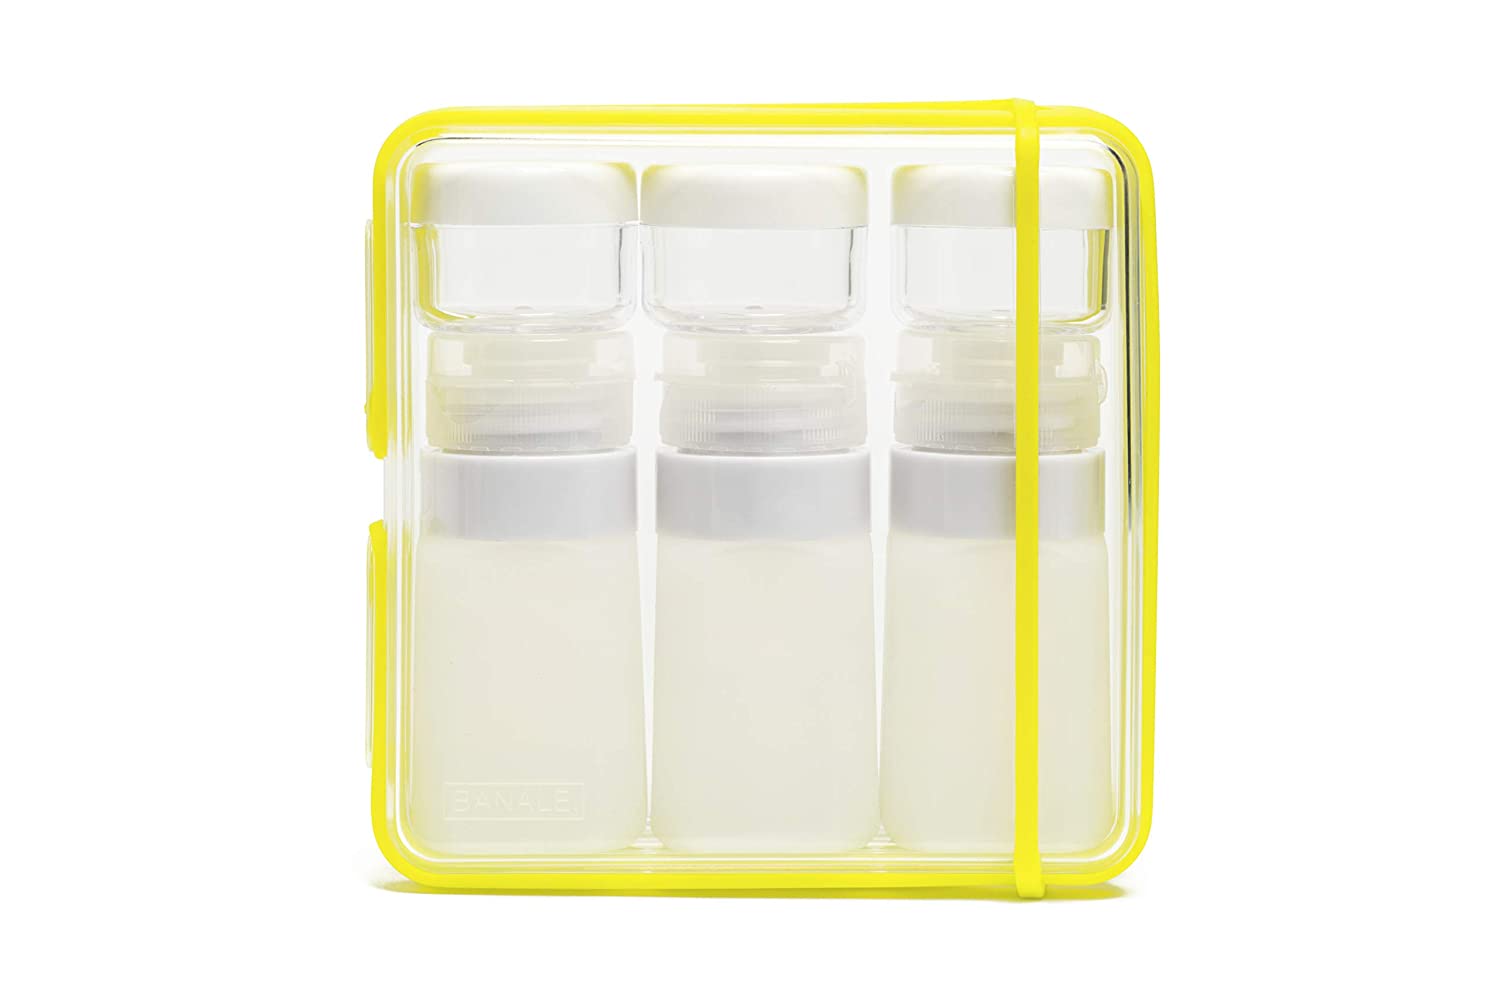 Banale Unisex Transparent And Squeezable Toiletry Containers Travel Kit 6 Piece